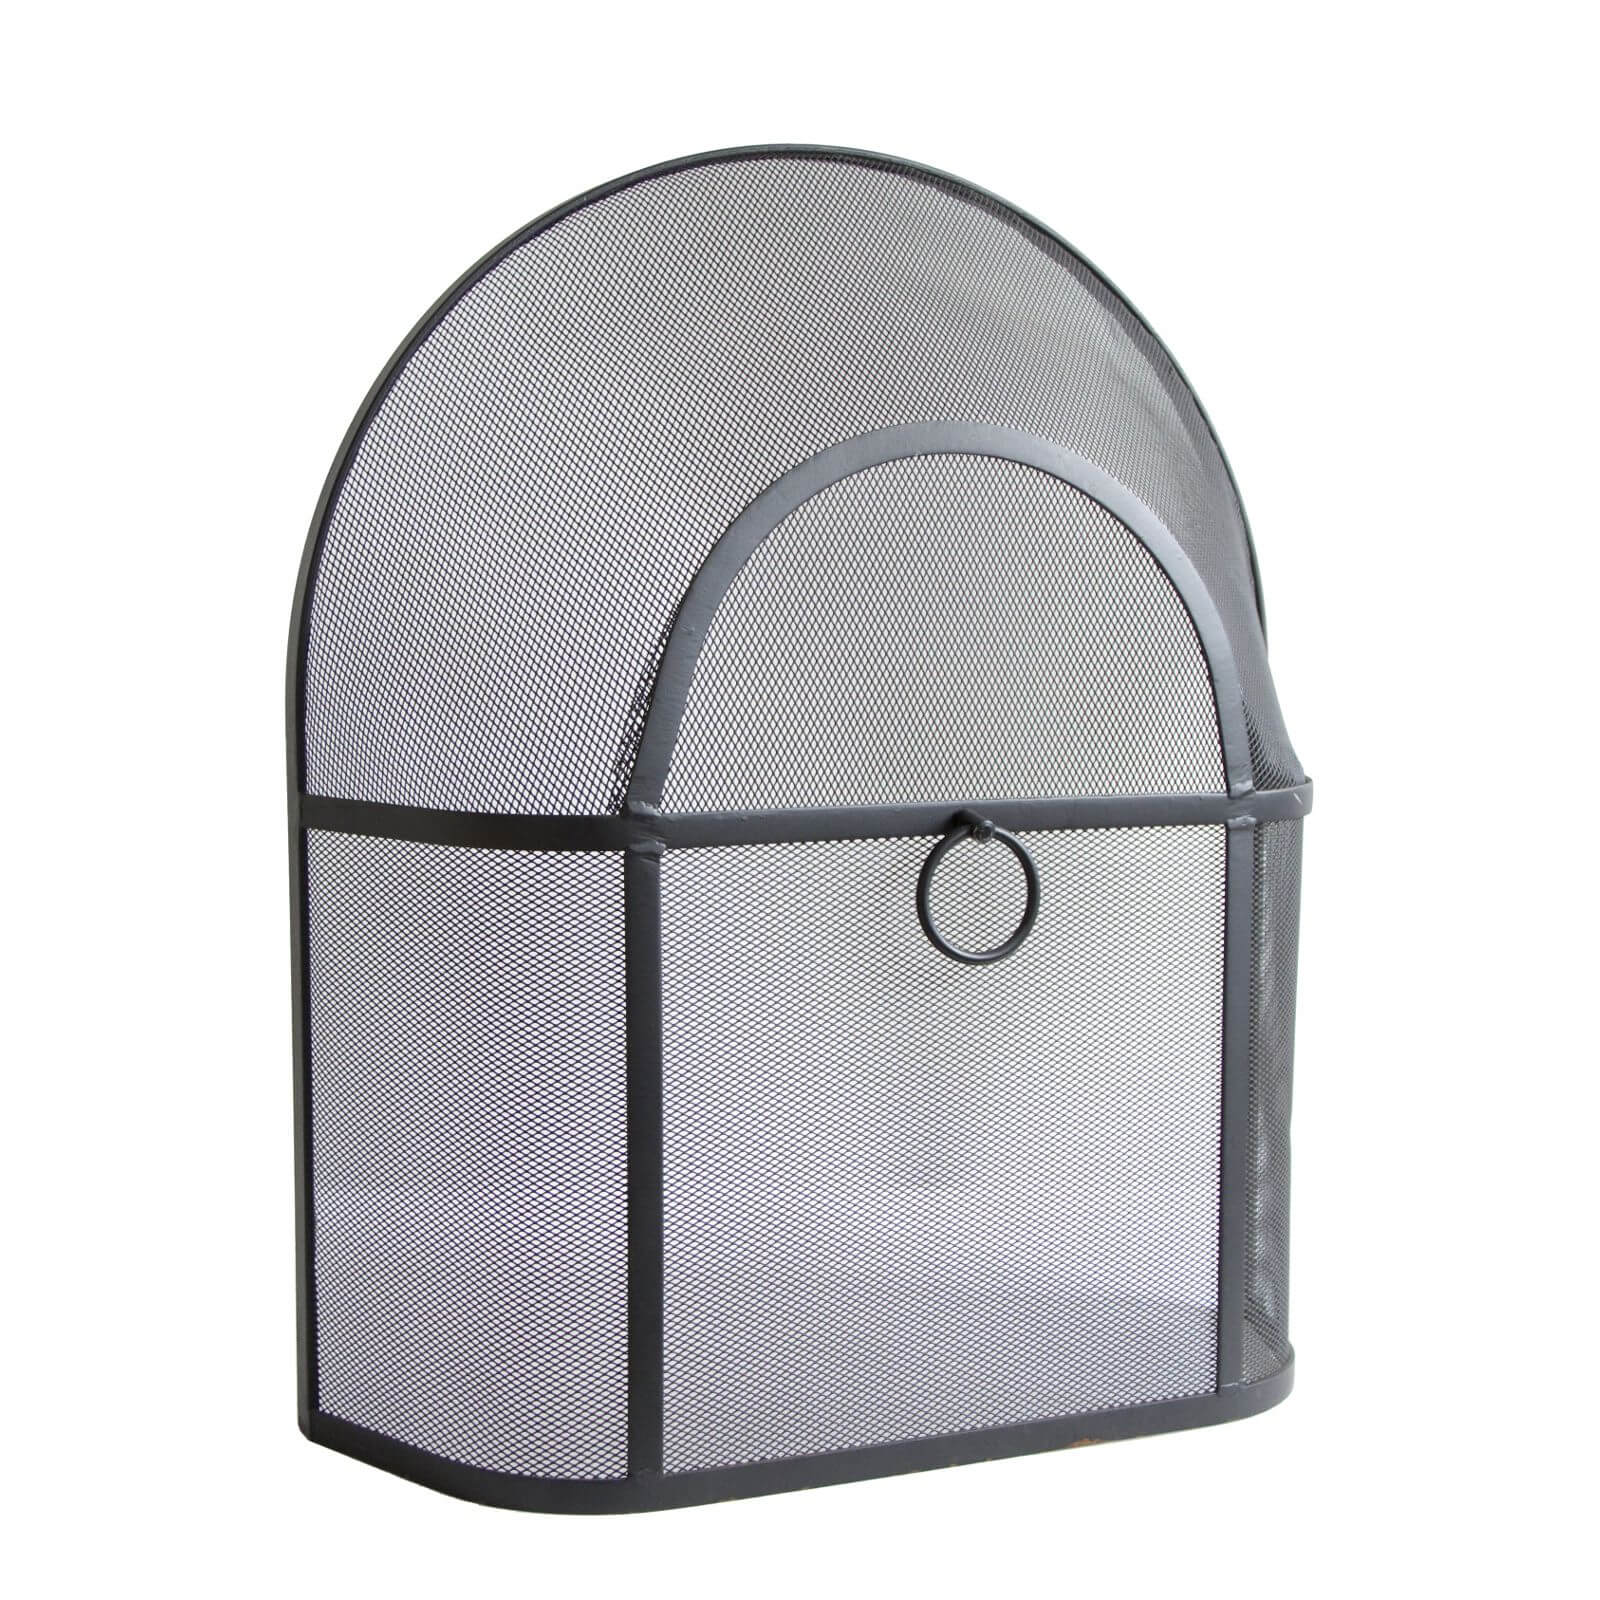 Photo of Black Curved Fire Guard - 28 Inch